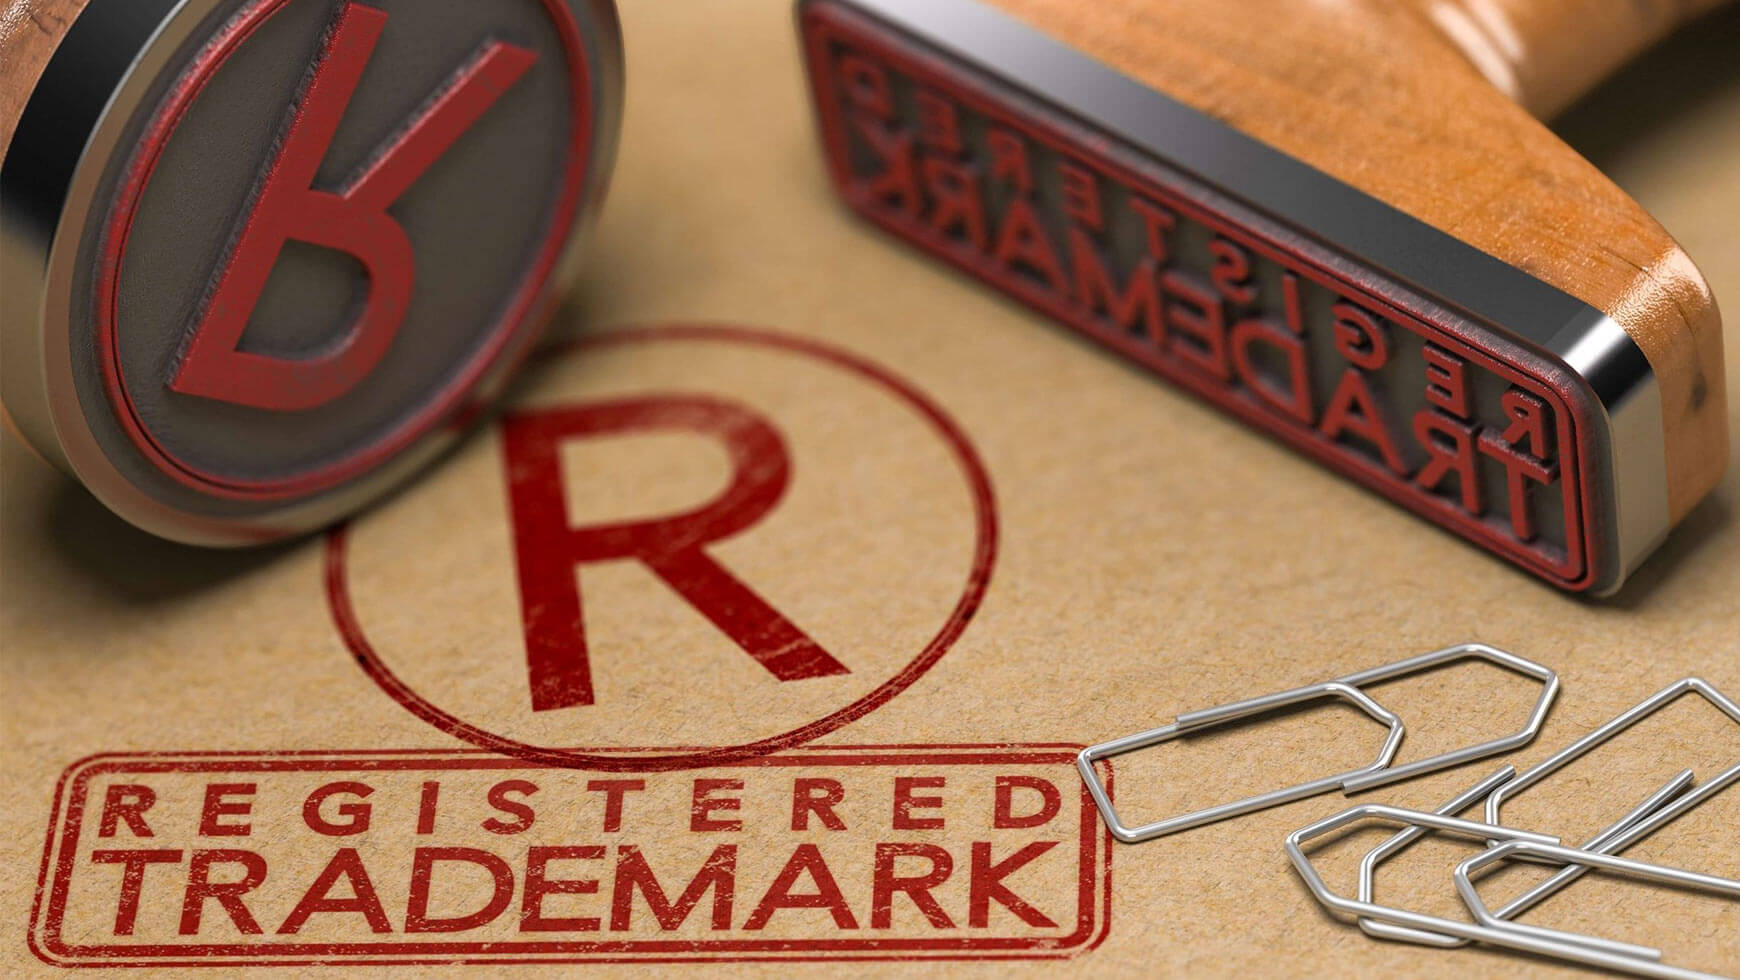 Registering trademark protection for foreign companies in Vietnam